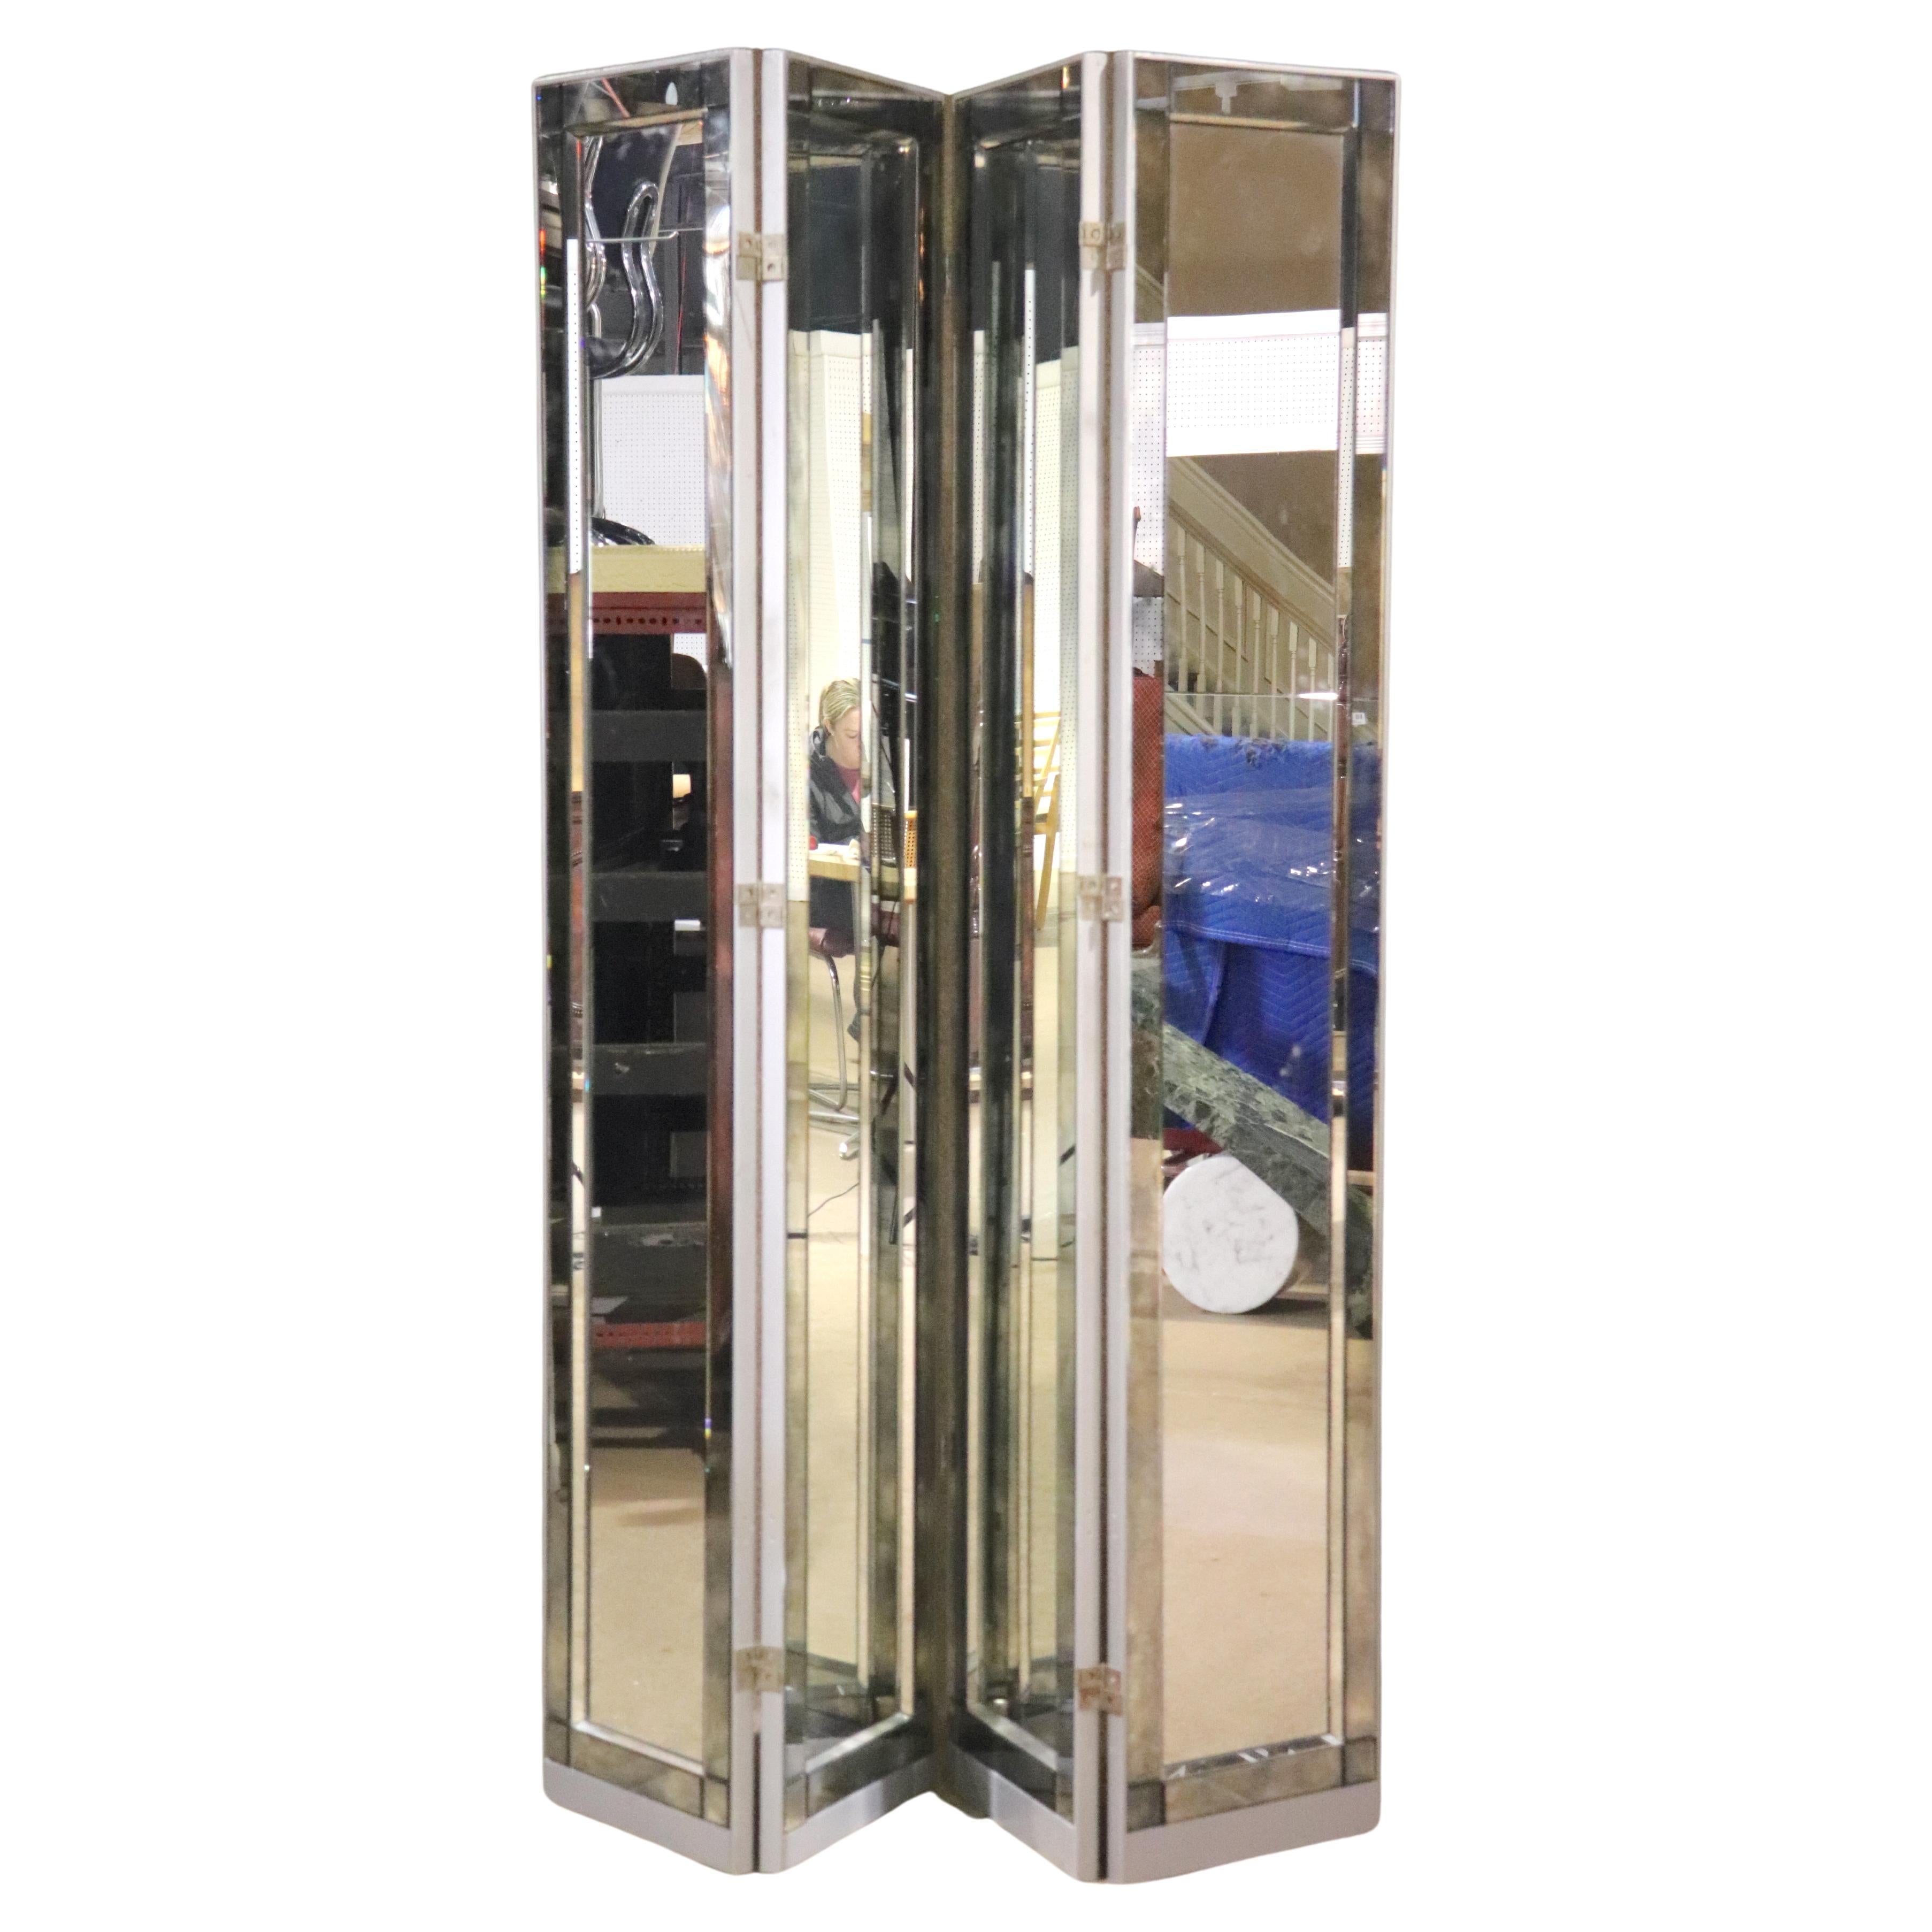 Six Foot Tall Mirrored Divider For Sale